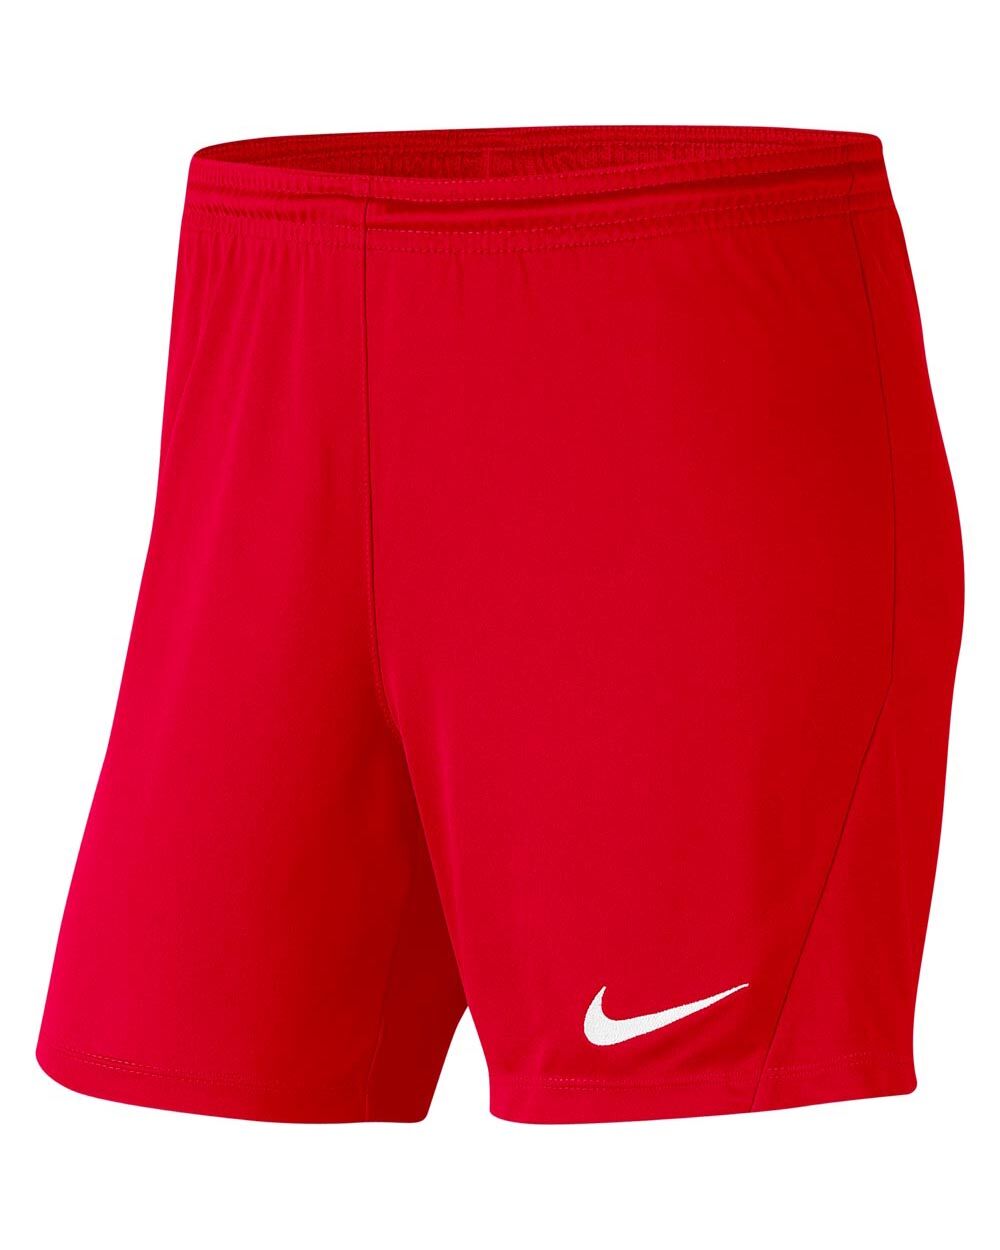 Nike Short Park III Rosso per Donne BV6860-657 XS